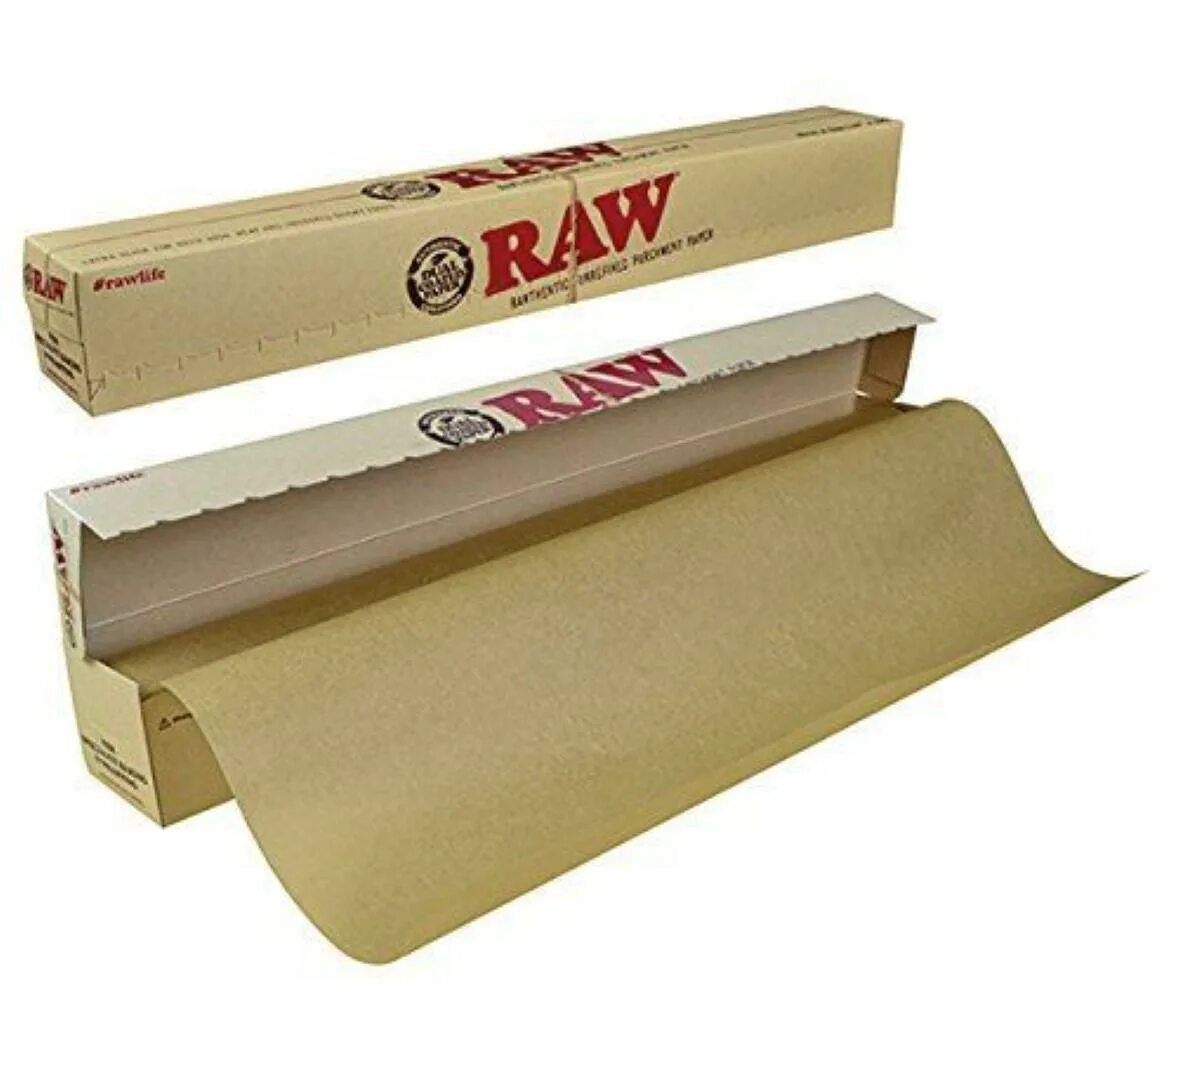 Raw бумага. Raw Rolling papers. Raw paper Rolls. Parchment paper for Baking.